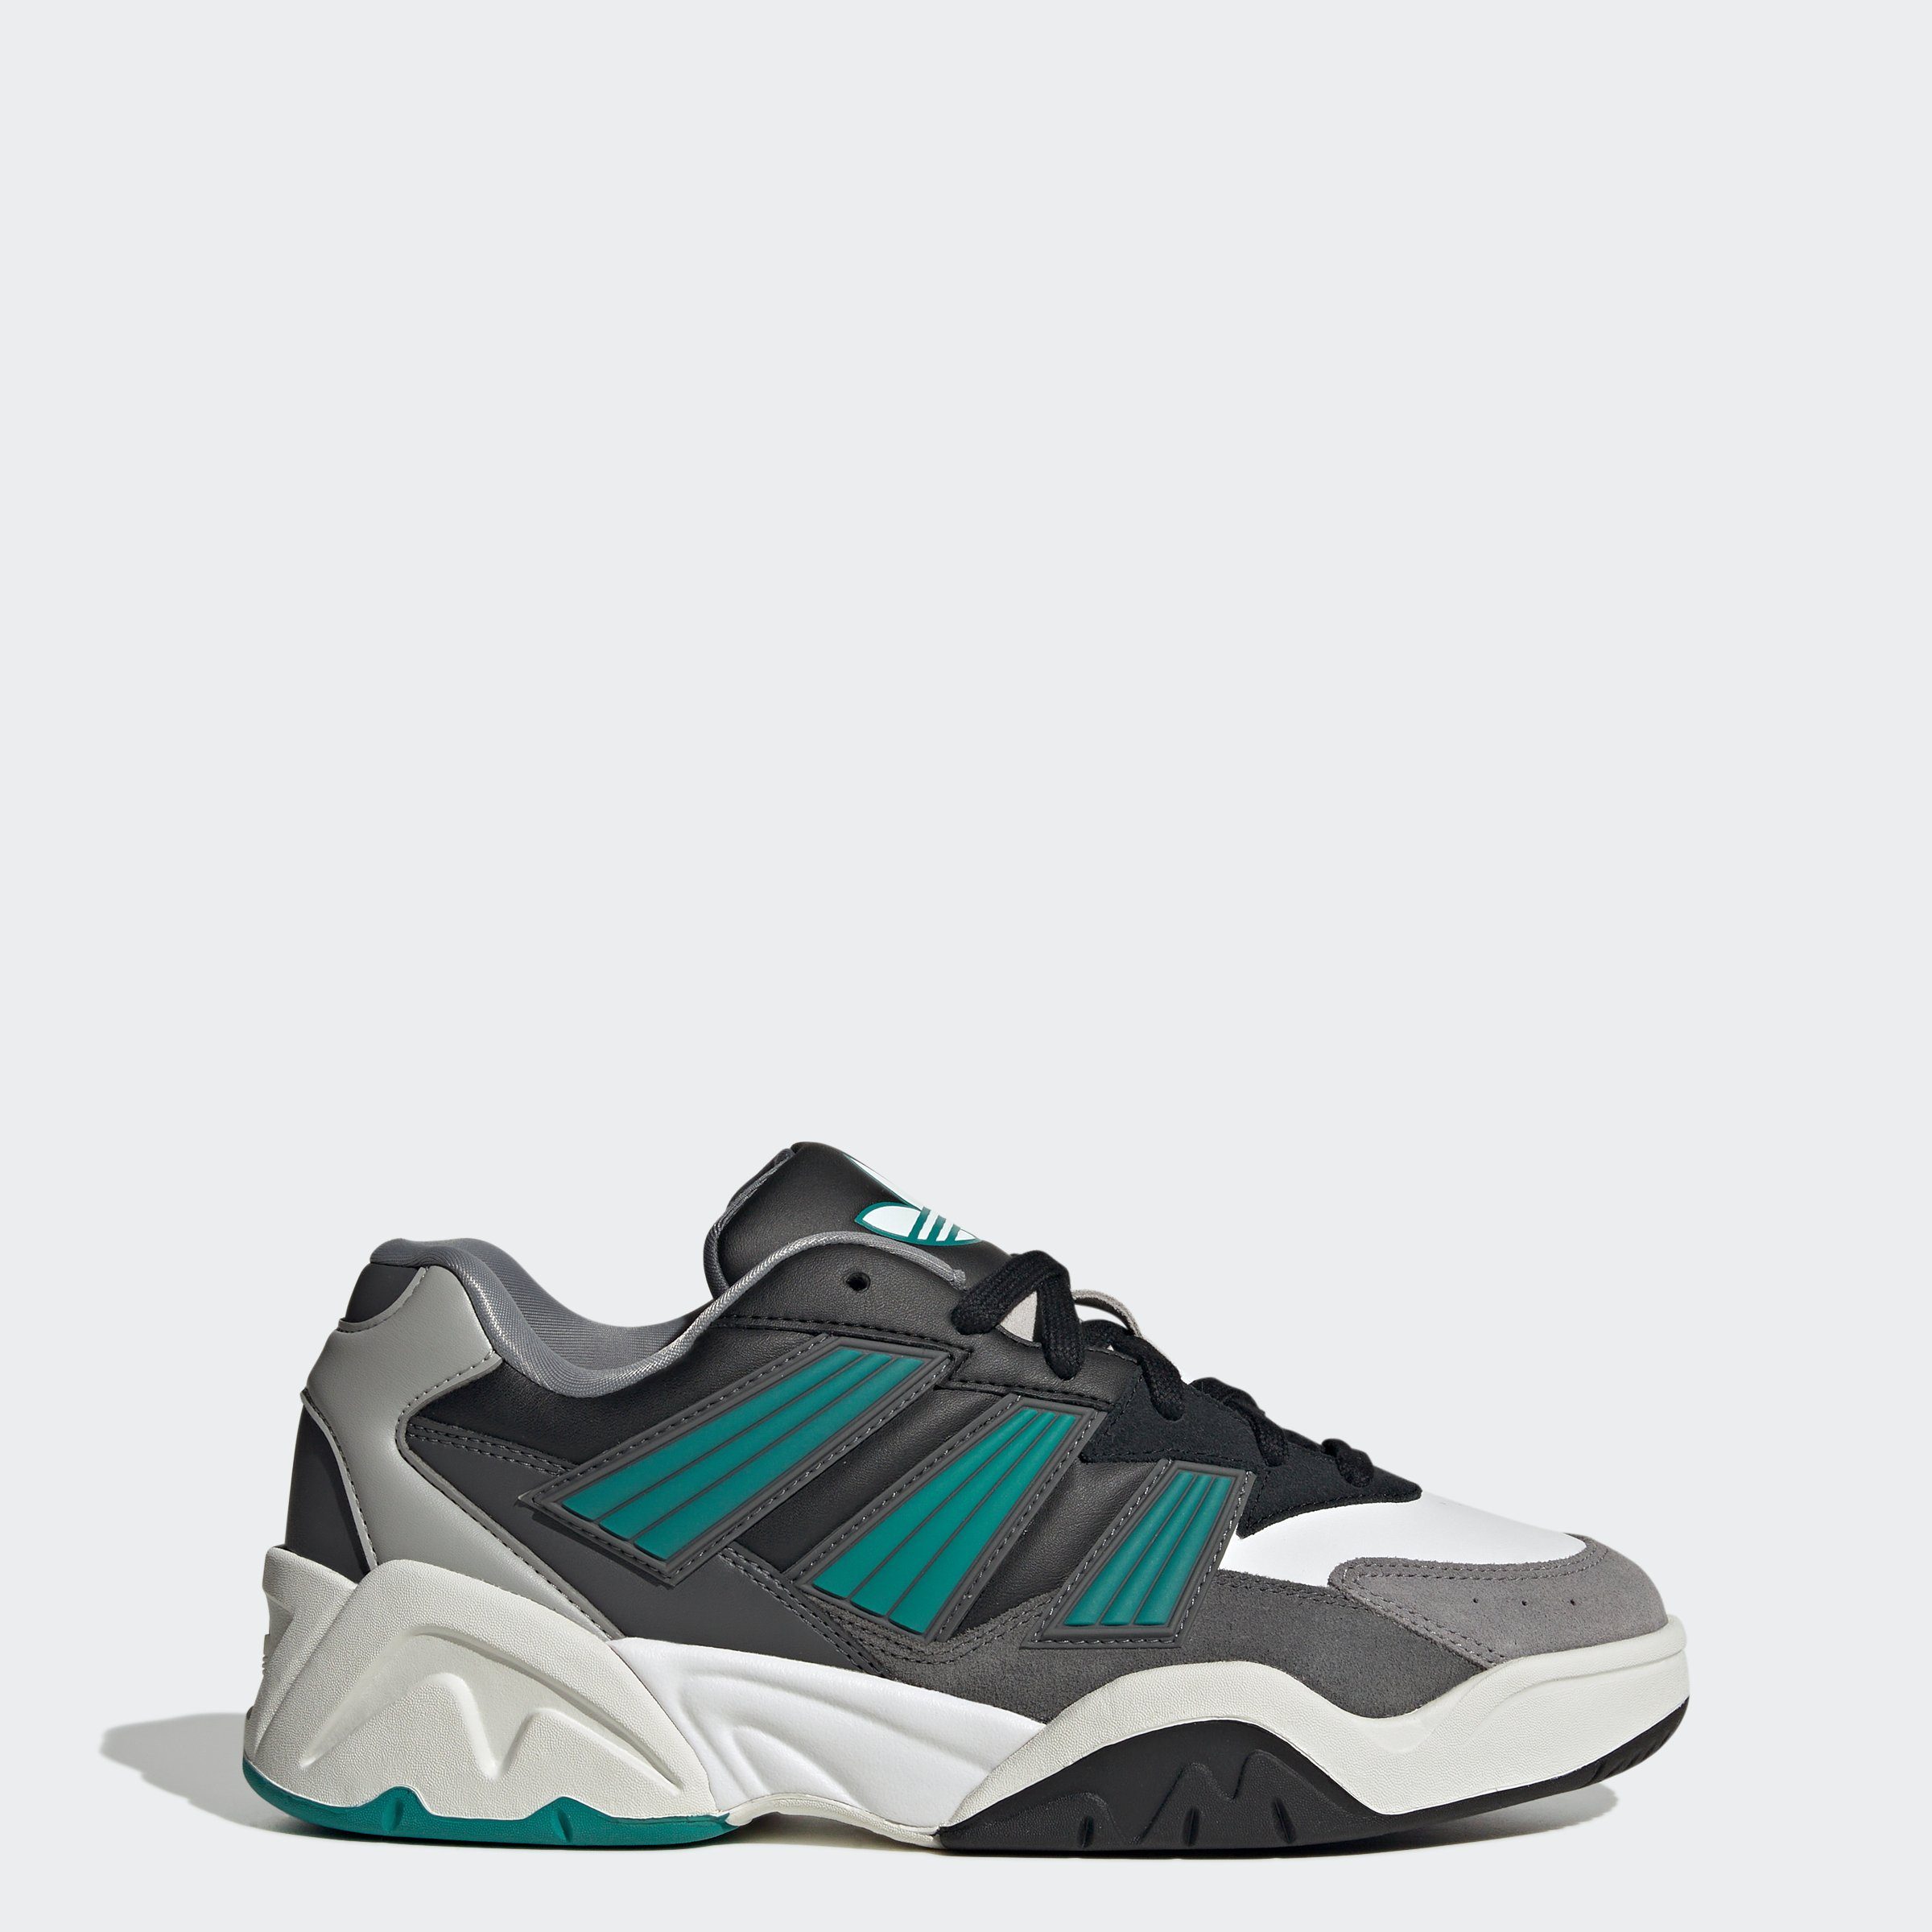 Eqt White Cloud Sneaker Originals / White Green MAGNETIC Crystal COURT / adidas